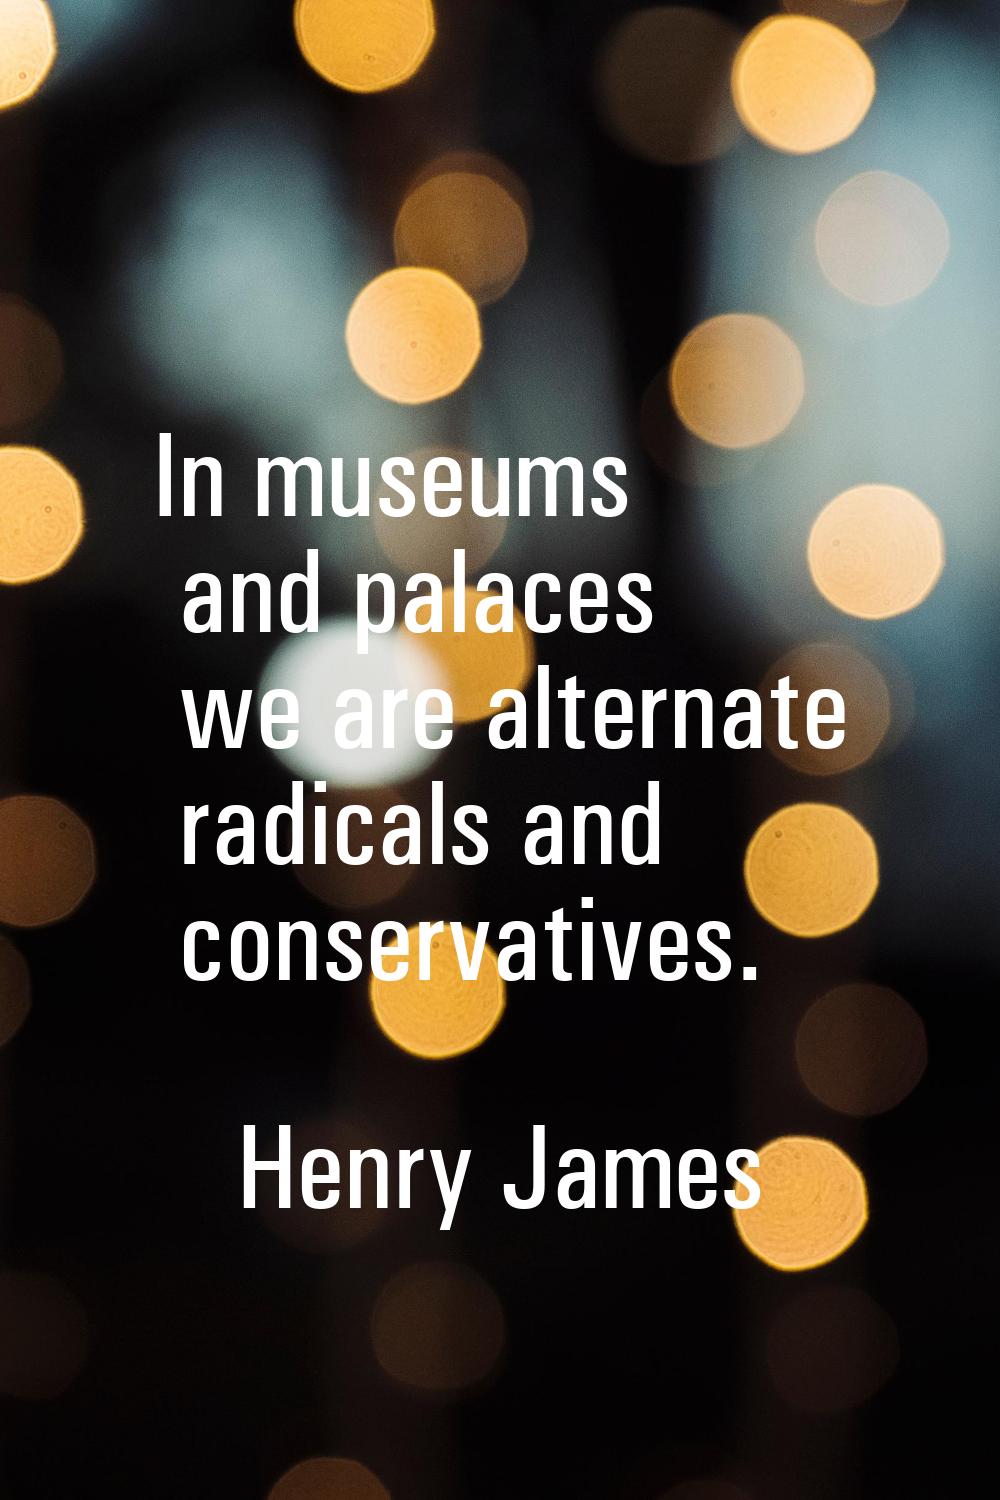 In museums and palaces we are alternate radicals and conservatives.